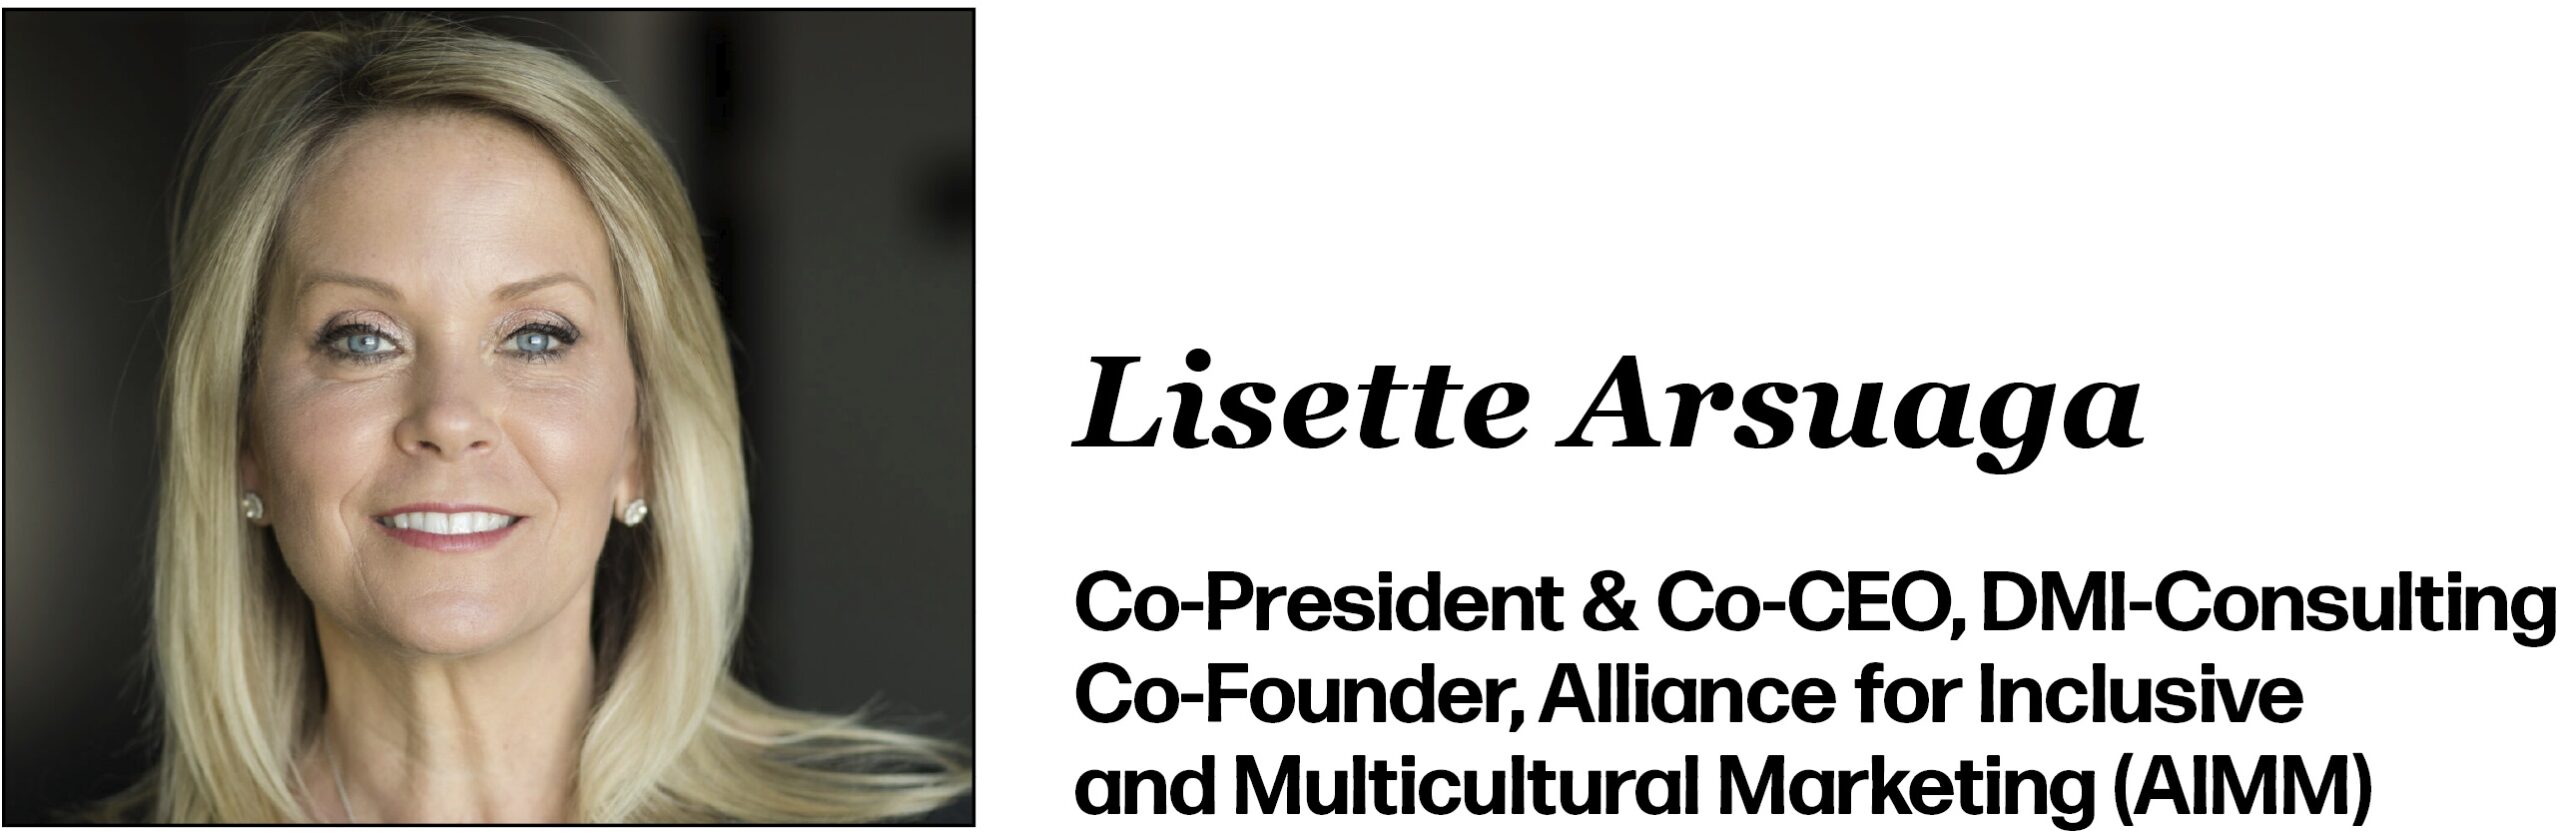 Lisette Arsuaga Co-President & Co-CEO, DMI-Consulting Co-Founder, Alliance for Inclusive and Multicultural Marketing (AIMM)